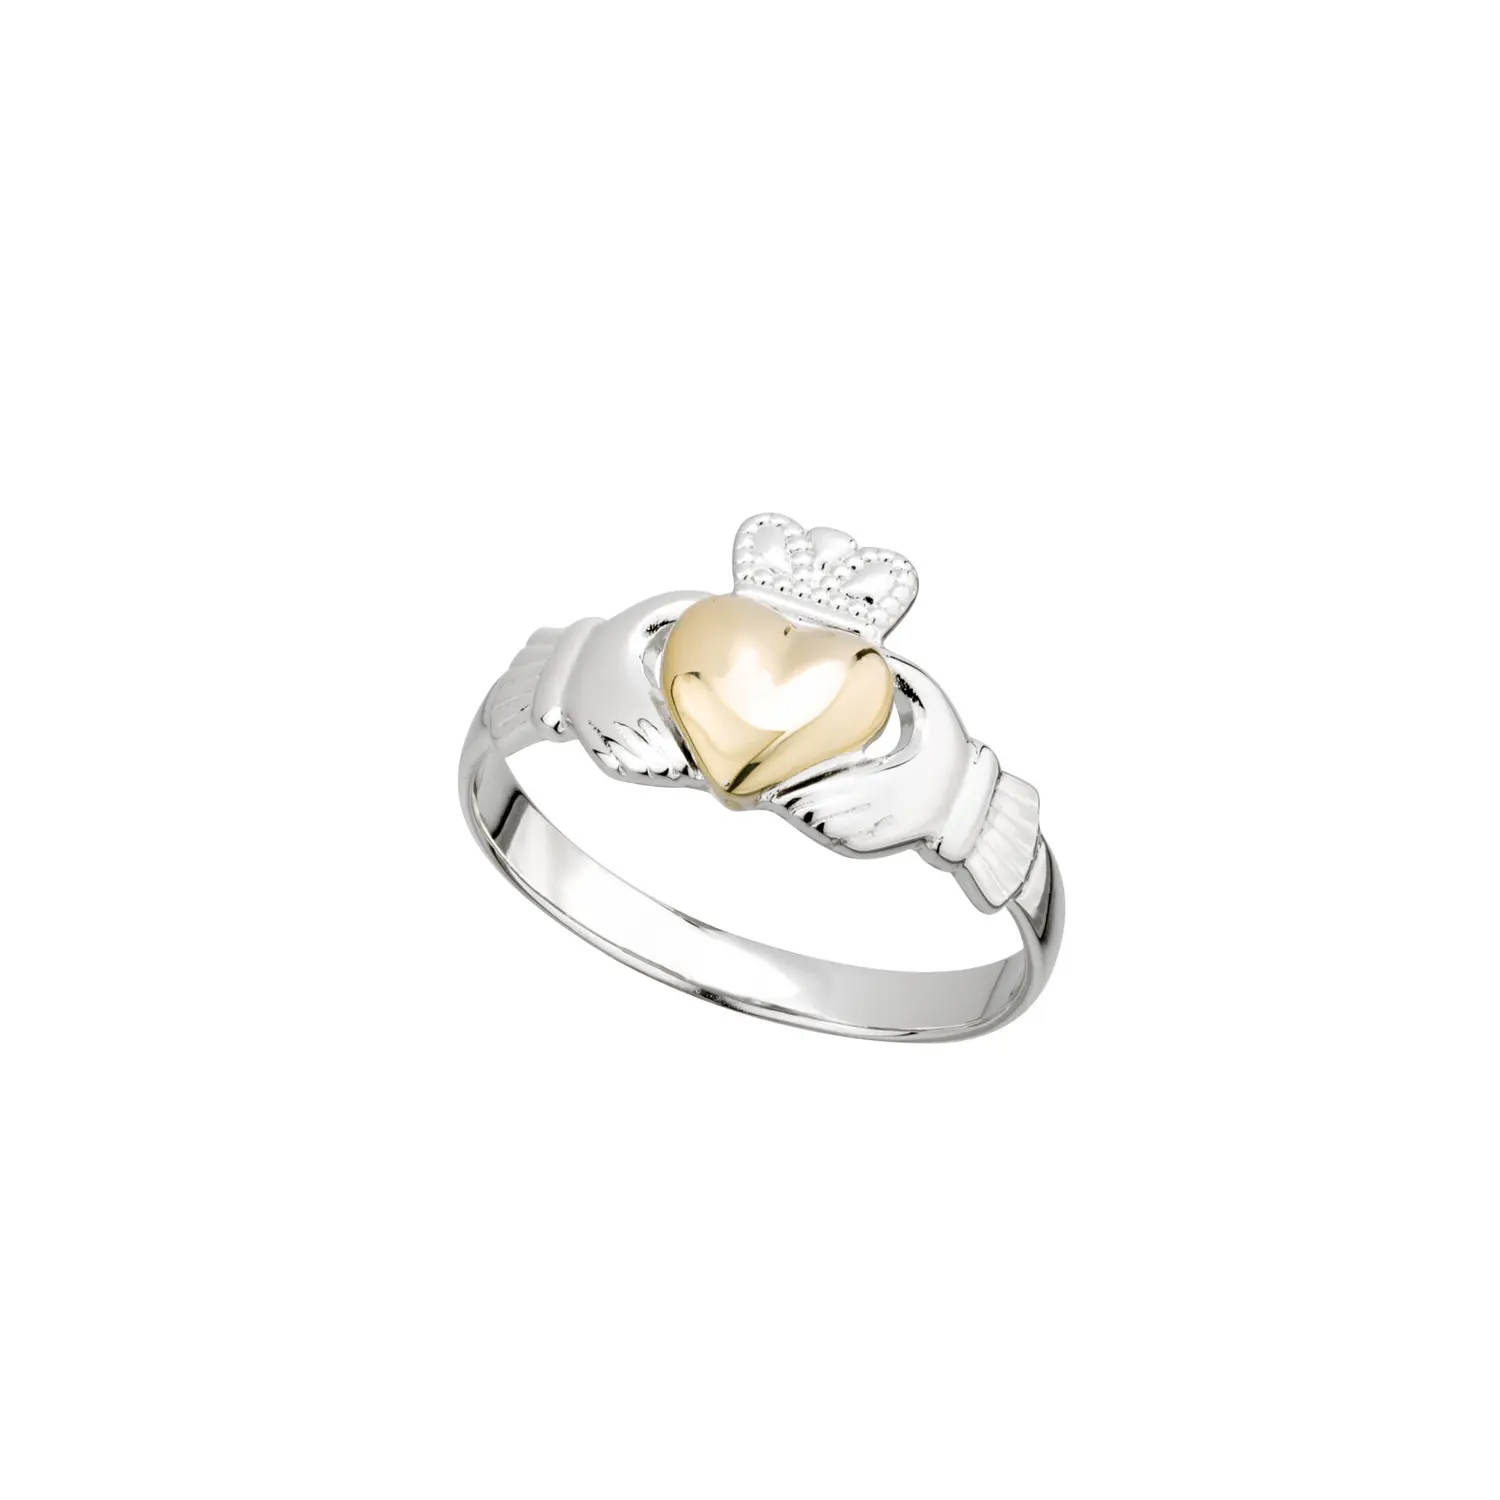 Sterling Silver Claddagh Ring with Gold Heart